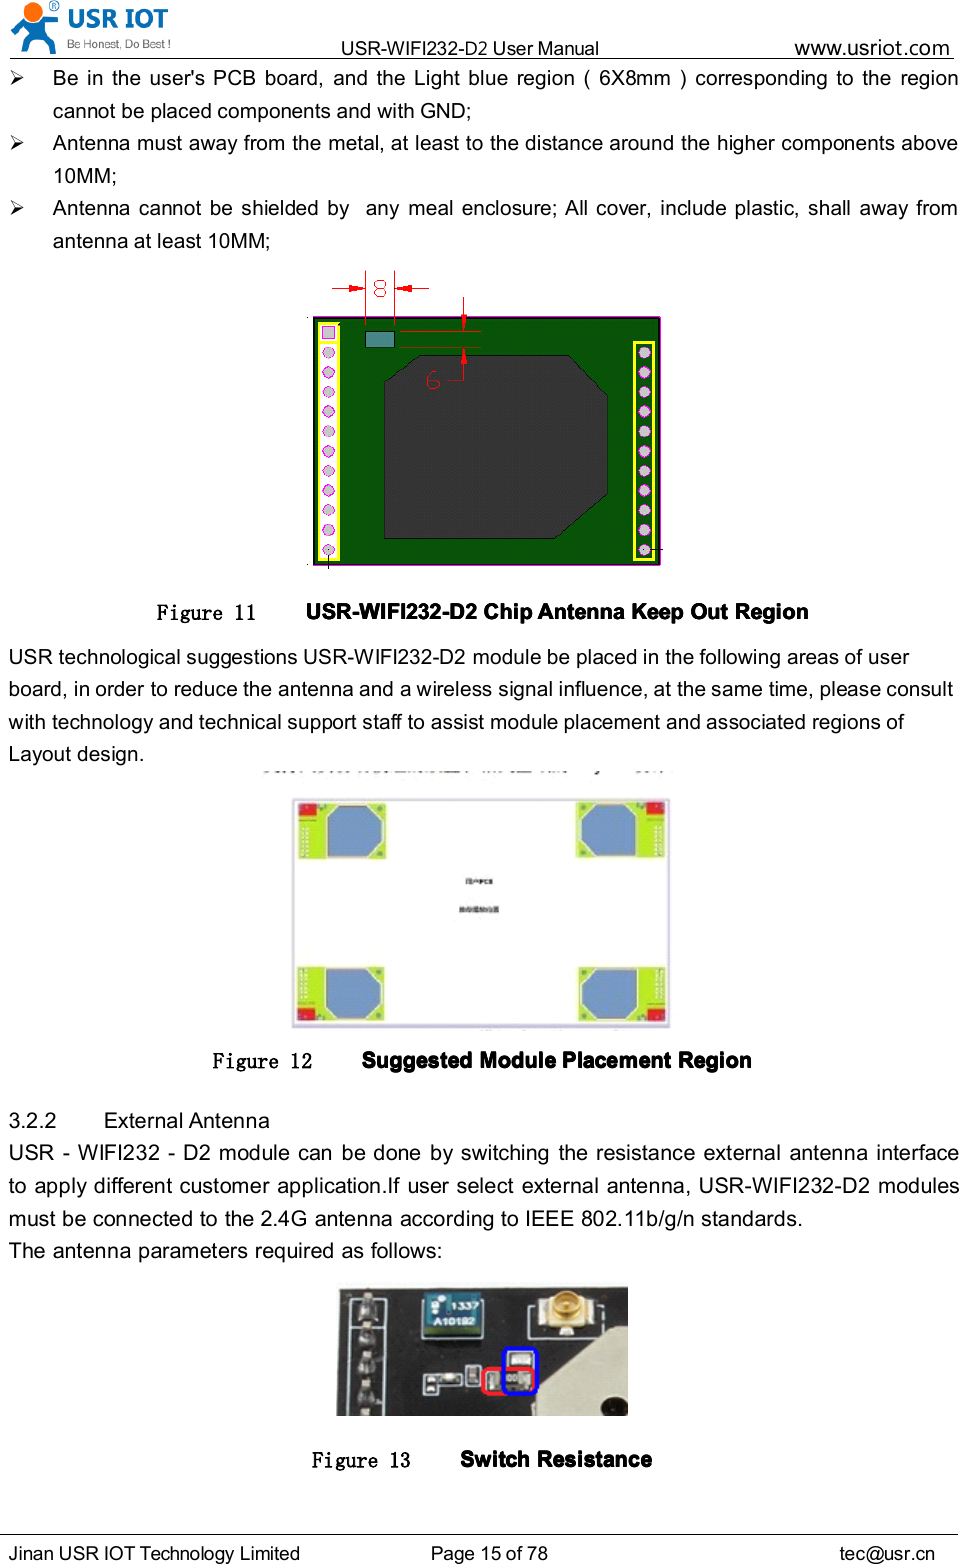 USR-WIFI232- D2 User Manual www.usr iot .comJinan USR IOT Technology Limited Page 15 of 78 tec@usr.cnBe in the user&apos;s PCB board, and the Light blue region ( 6X8 mm ) corresponding to the regioncannot be placed components and with GND;Antenna must away from the metal, at least to the distance around the higher components above10MM;Antenna can no t be shielded by any meal enclosure; All cover, include plastic, shall away fromantenna at least 10MM;Figure 11 USR-WIFI232-D2USR-WIFI232-D2USR-WIFI232-D2USR-WIFI232-D2 ChipChipChipChip AntennaAntennaAntennaAntenna KeepKeepKeepKeep OutOutOutOut RegionRegionRegionRegionUSR technological suggestions USR-WIFI232-D2 module be placed in the following areas of userboard, in order to reduce the antenna and a wireless signal influence, at the same time, please consultwith technology and technical support staff to assist module placement and associated regions ofLayout design.Figure 12 SuggestedSuggestedSuggestedSuggested ModuleModuleModuleModule PlacementPlacementPlacementPlacement RegionRegionRegionRegion3.2.2 External AntennaUSR - WIFI232 - D2 module can be done by switching the resistance external antenna interfaceto apply different customer application. If user select external antenna, USR-WIFI232-D2 modulesmust be connected to the 2.4G antenna according to IEEE 802.11b/g/n standards.The antenna parameters required as follows:Figure 13 SwitchSwitchSwitchSwitch RRRR esistanceesistanceesistanceesistance